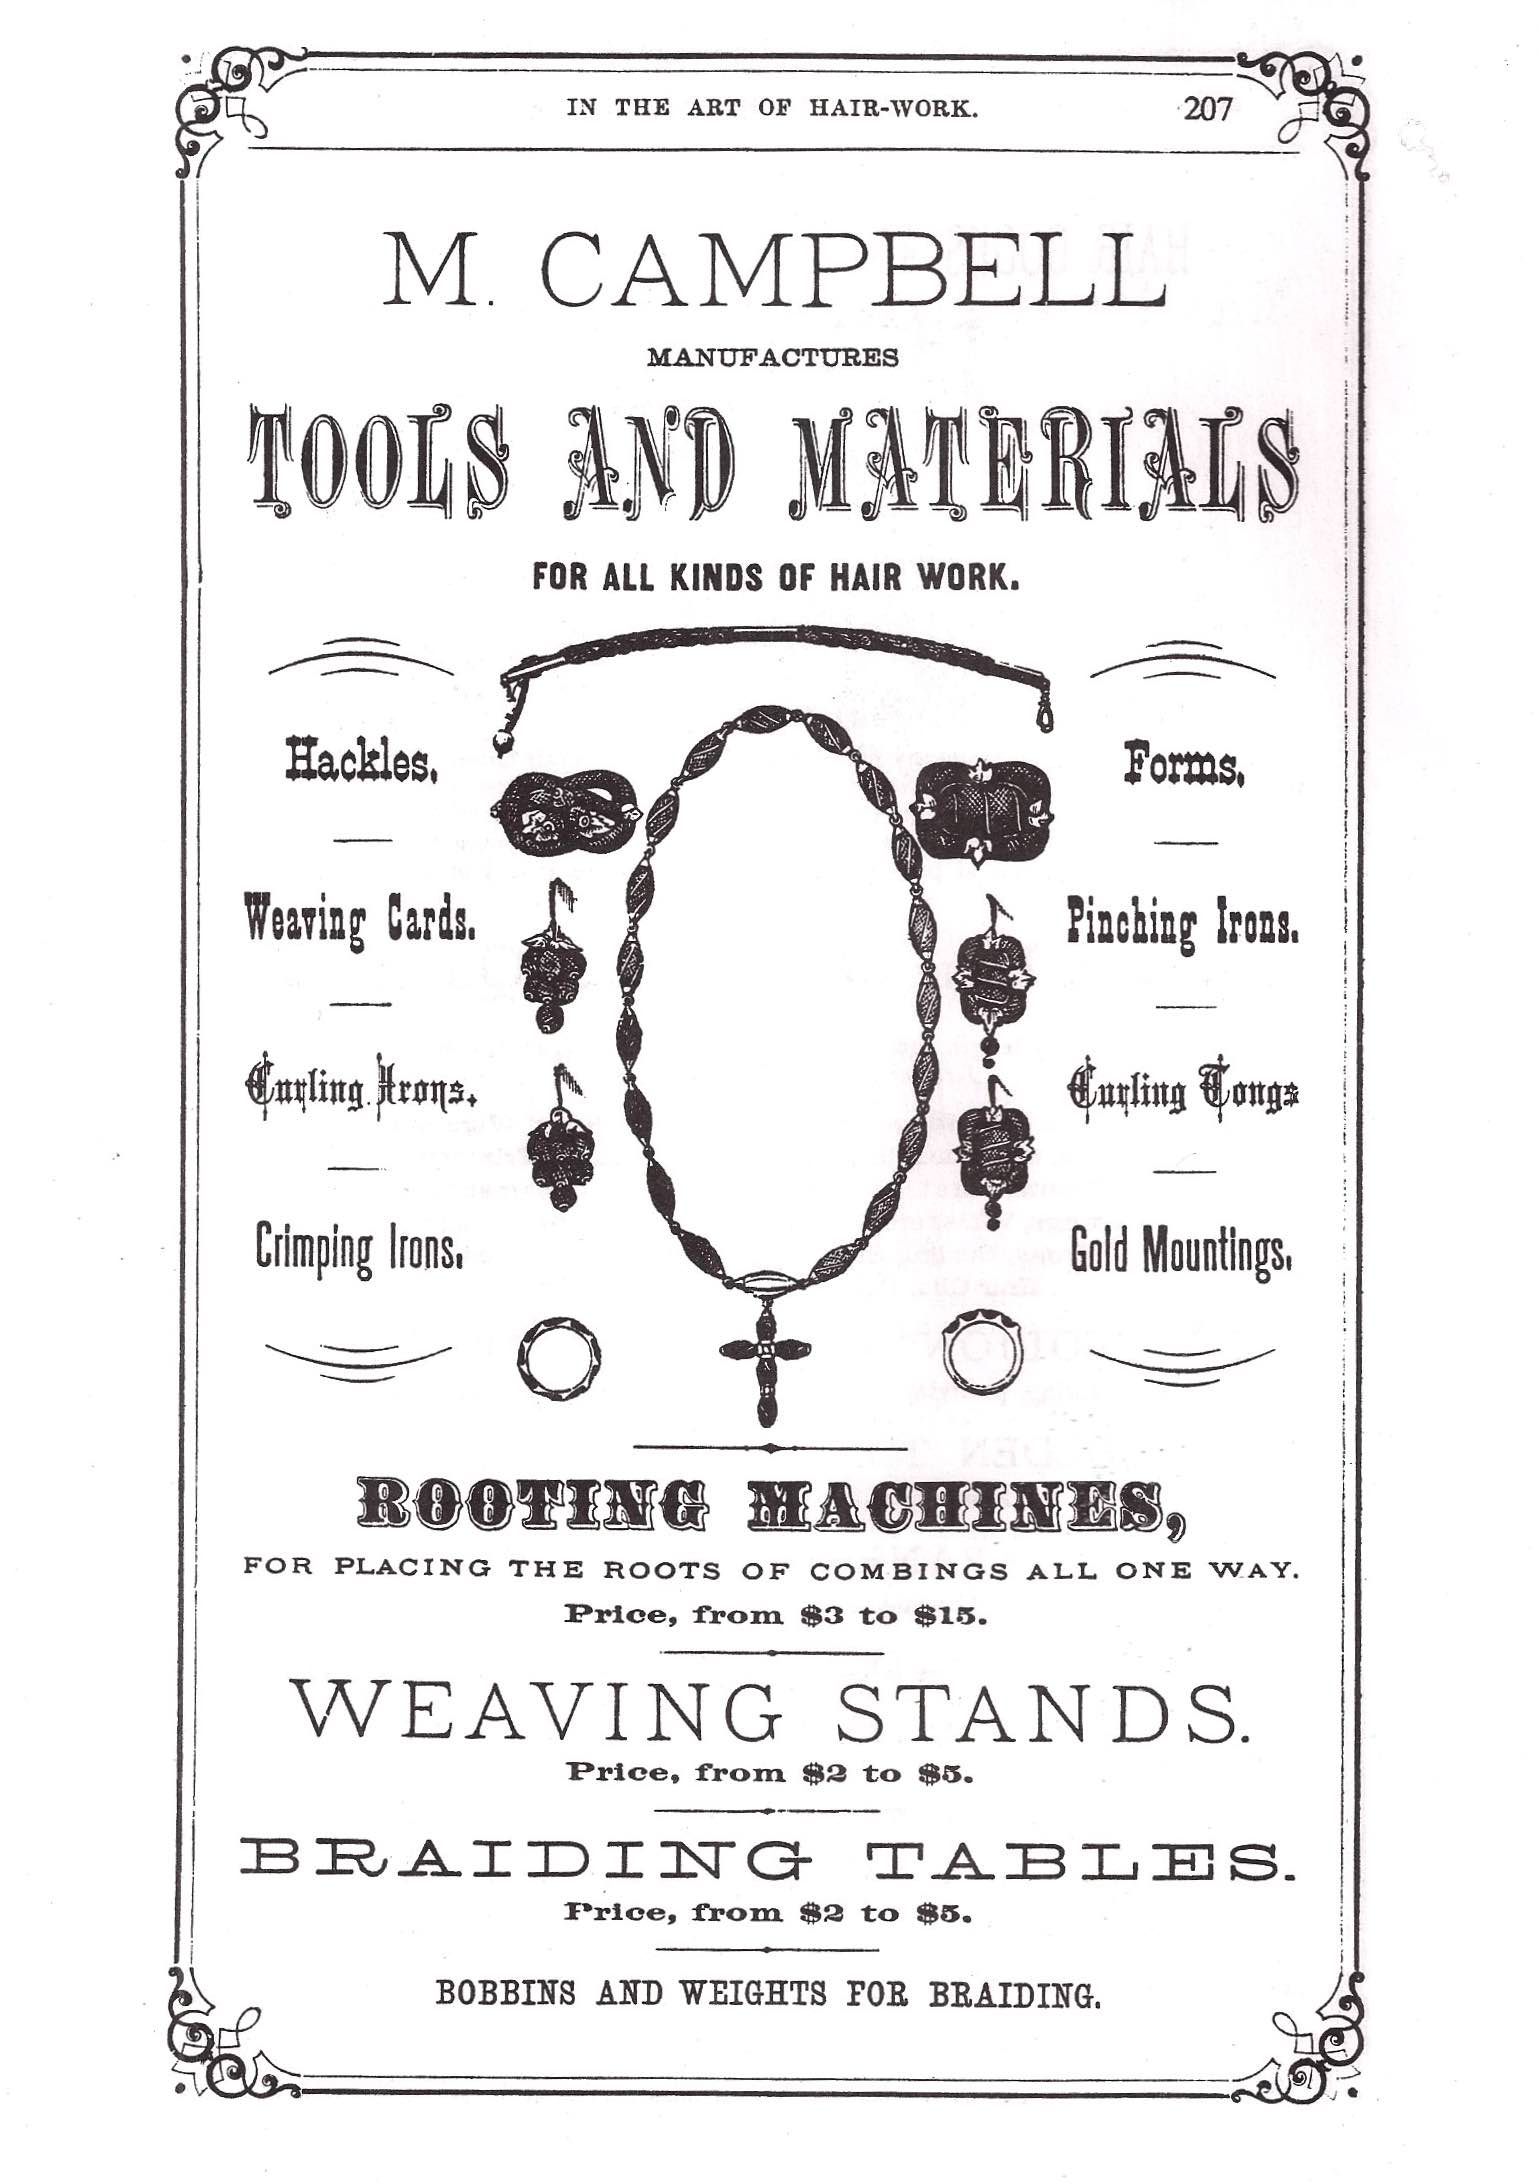 Advertisement in Godey's Lady's Book